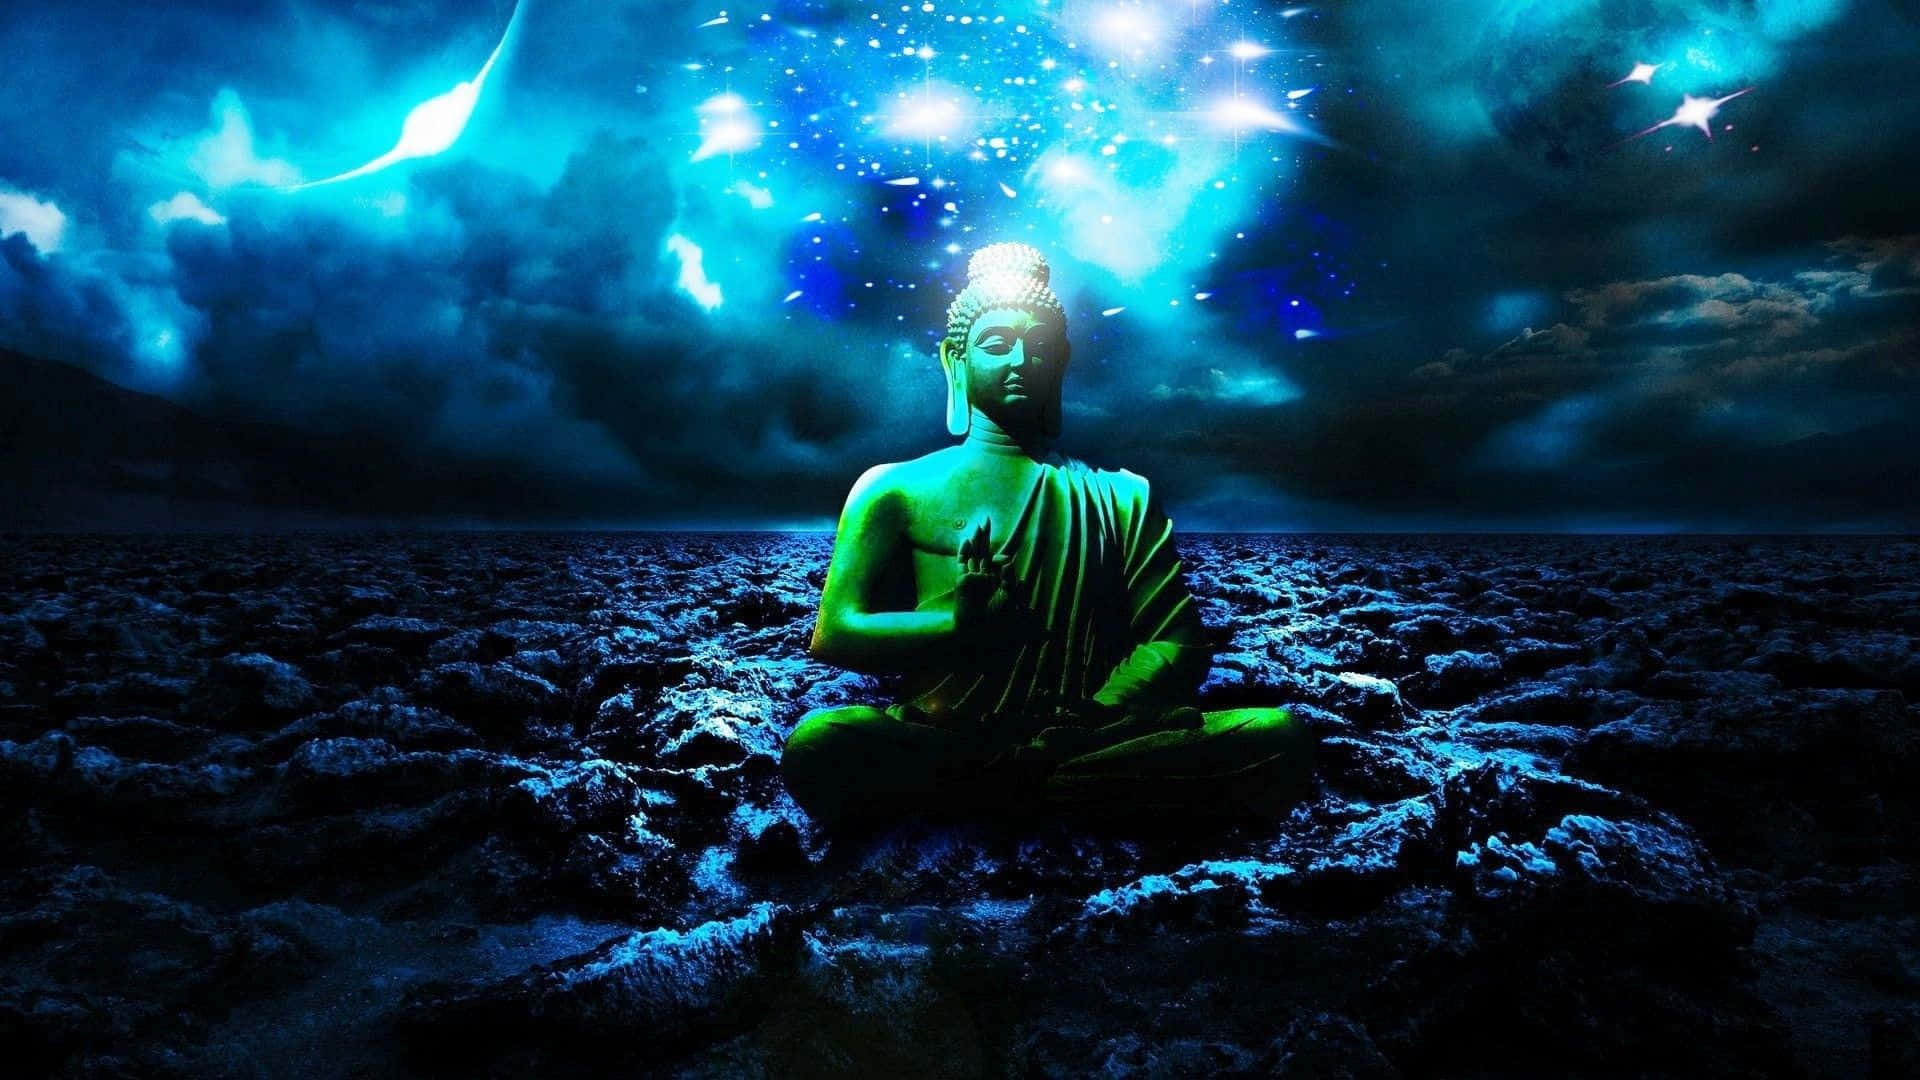 Buddha In The Field With Stars And Clouds Wallpaper